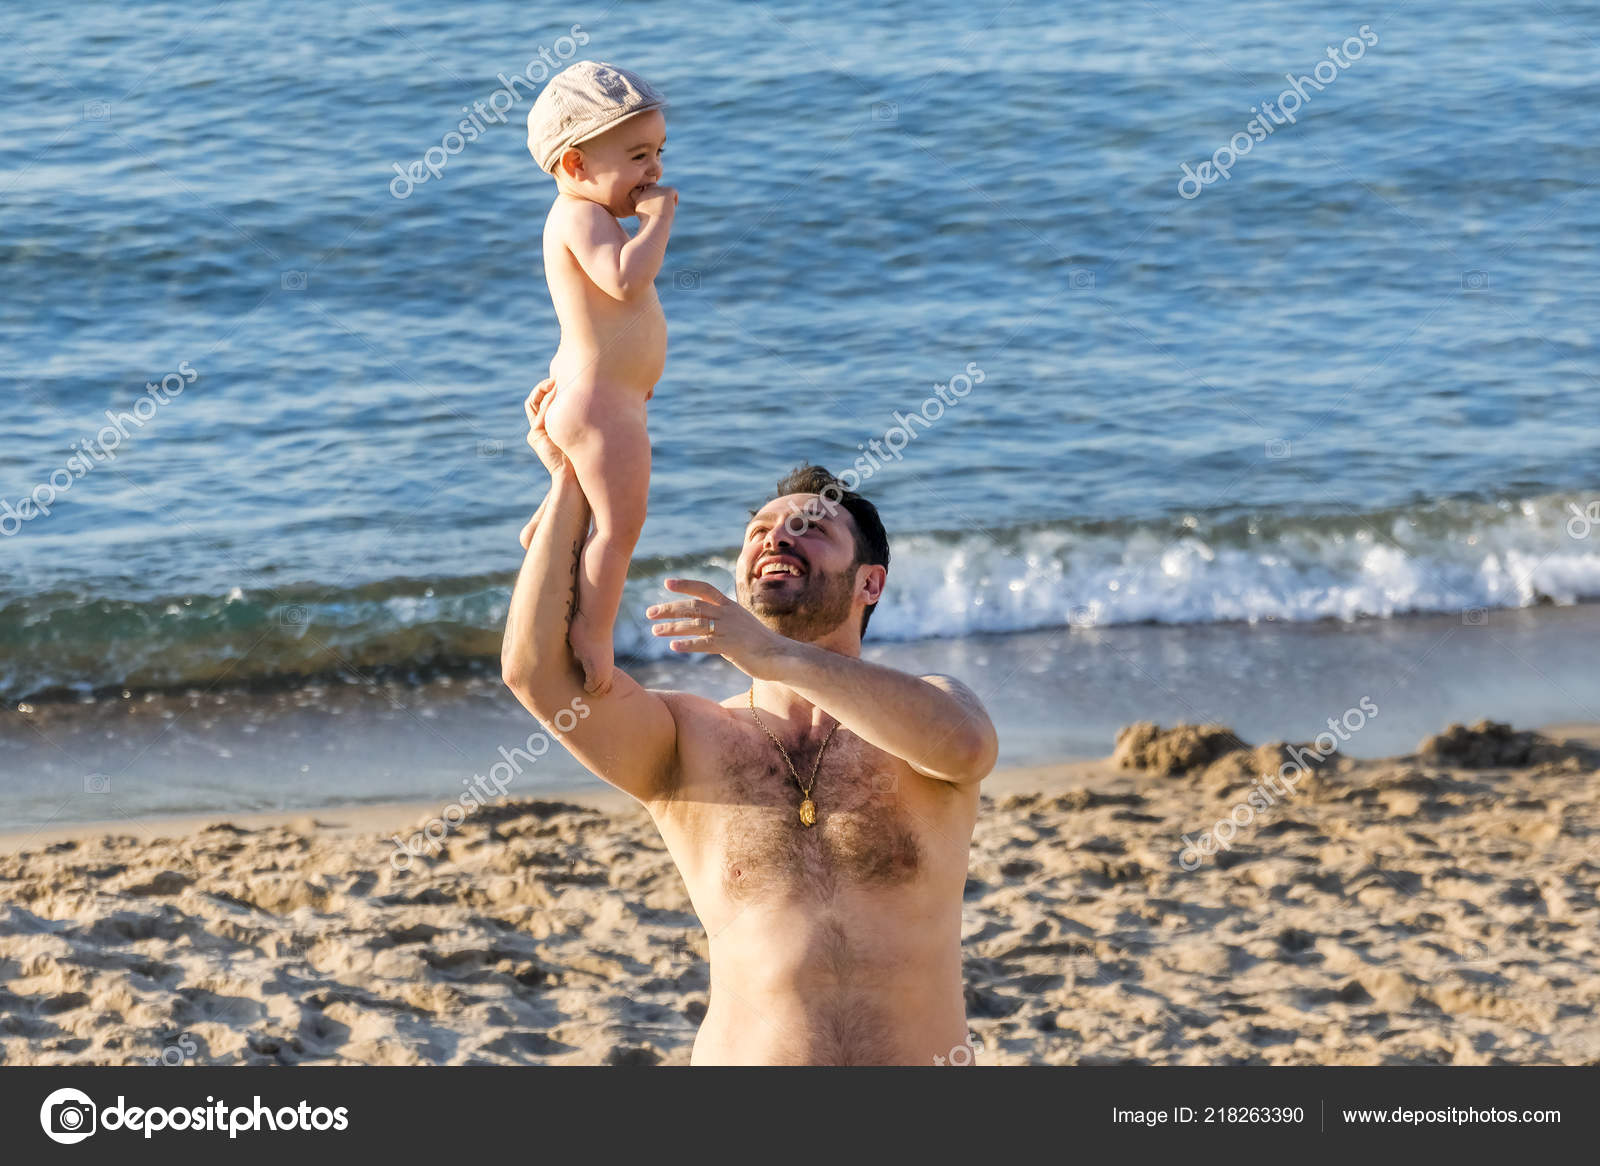 Old daddy naked in beach